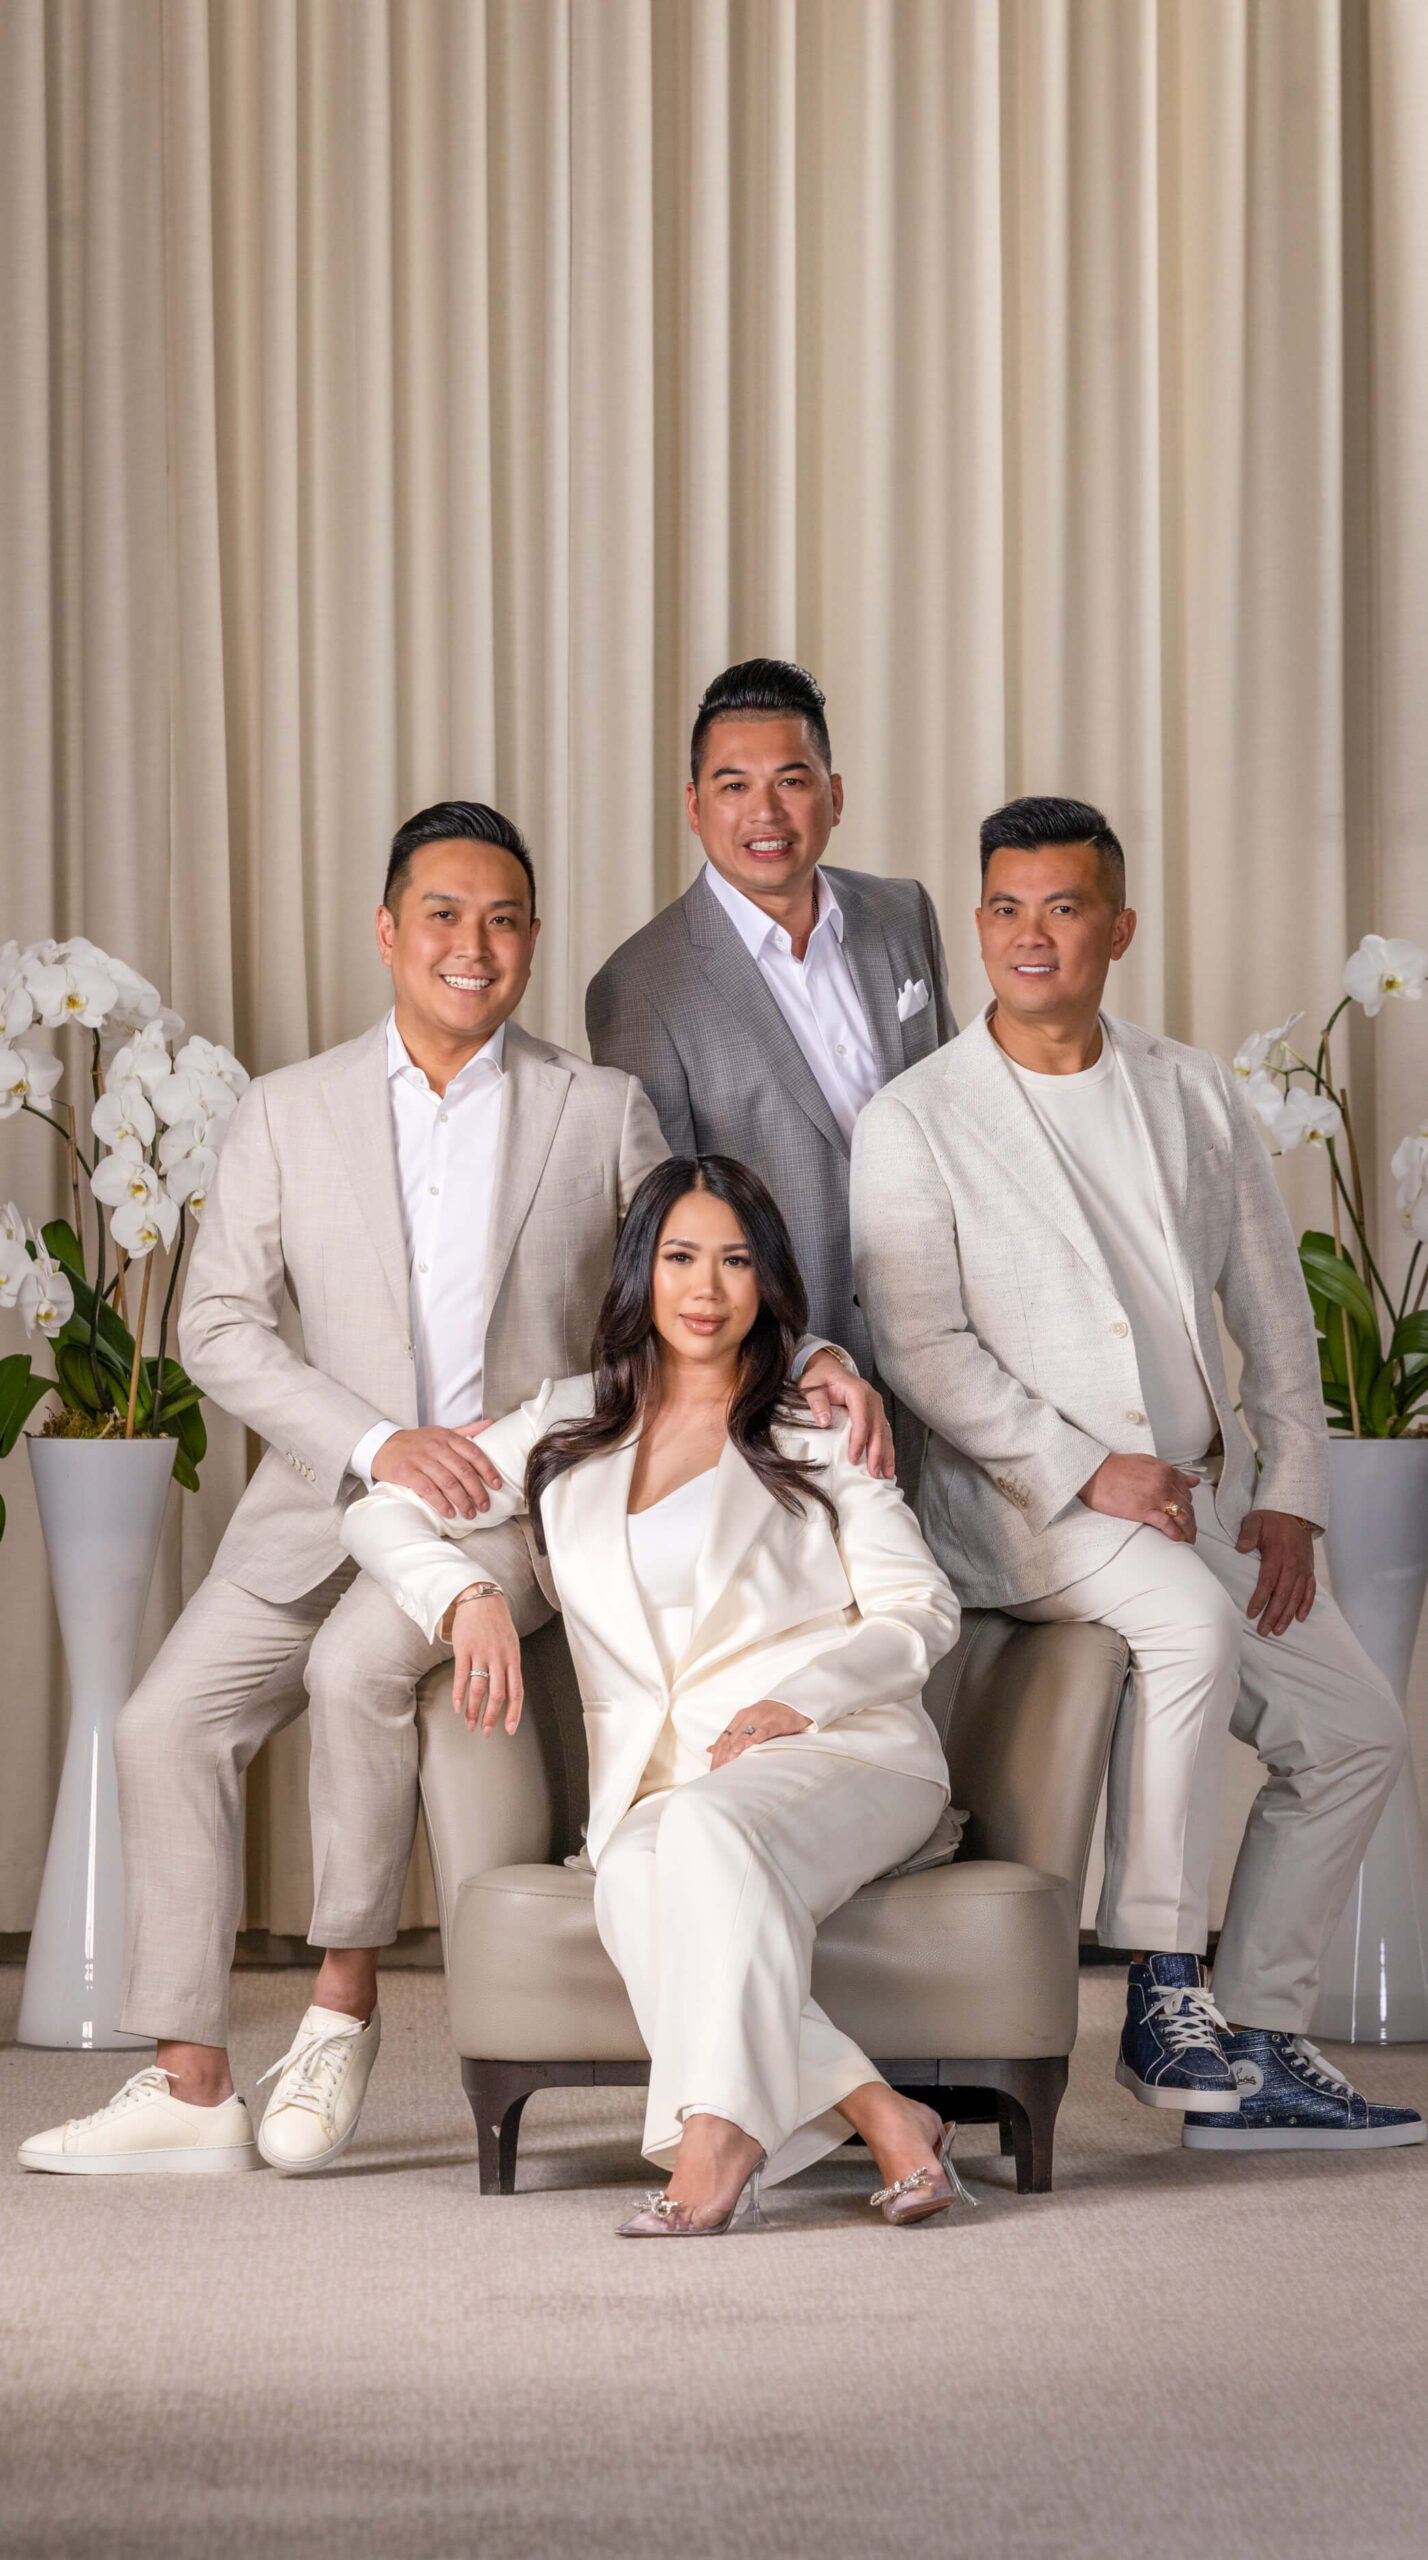 men and woman in light suits with beige drape background and orchid flowers